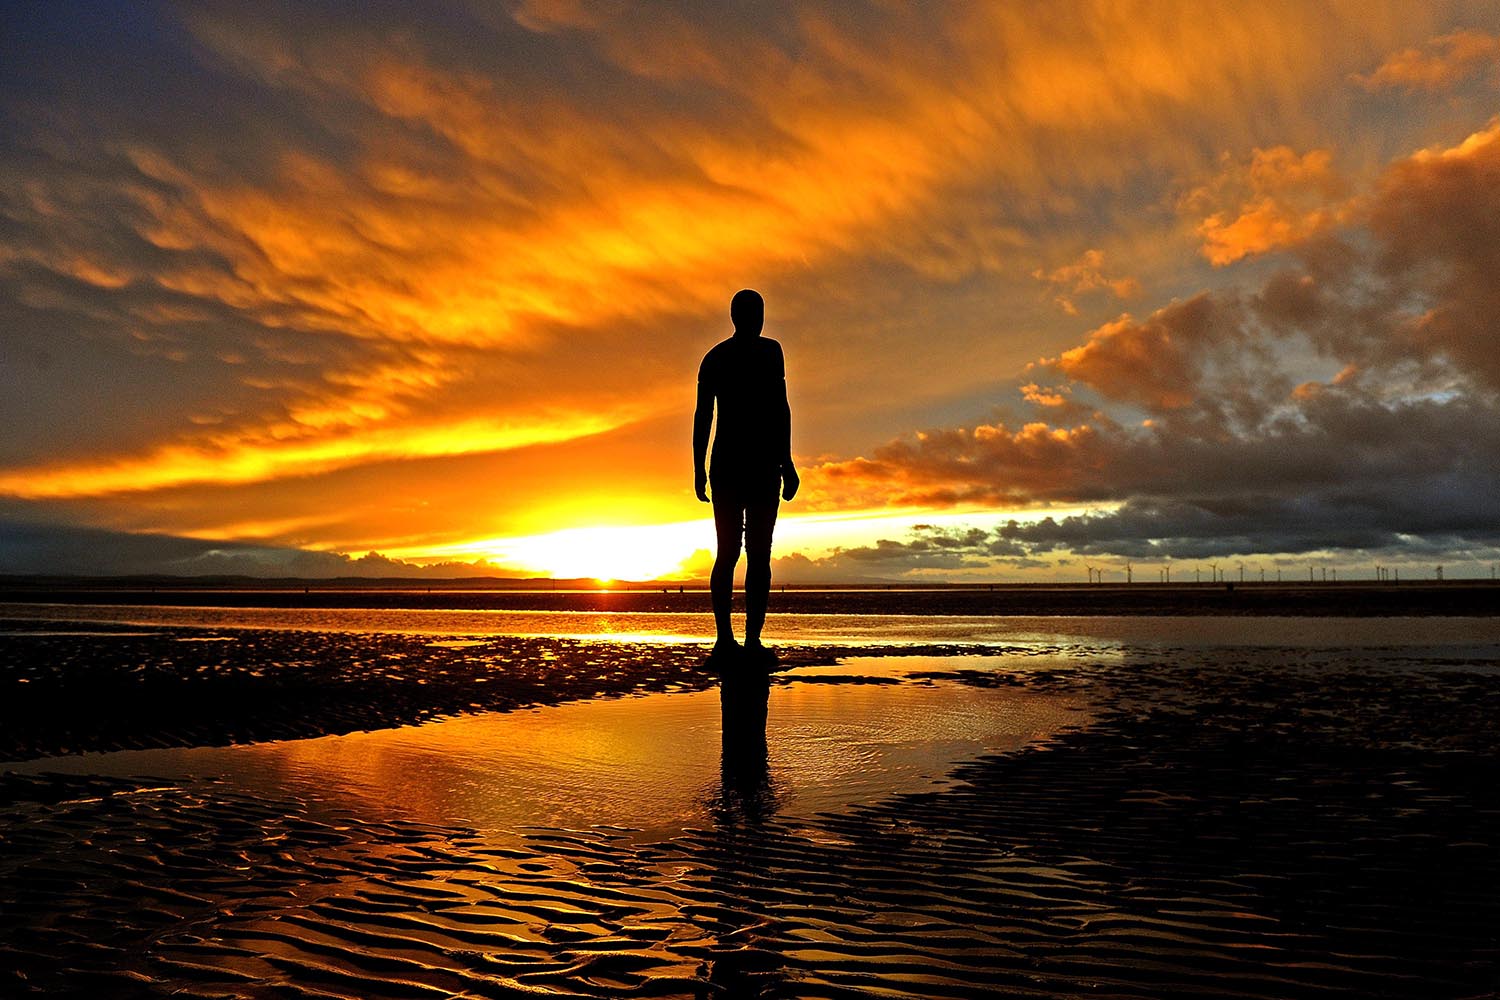 Dramatic shot of one of the 'iron men' in silhouette against the sunset from Antony Gormley's Another Place sculpture installation at Crosby beach in Liverpool. Picture by Gareth Jones.